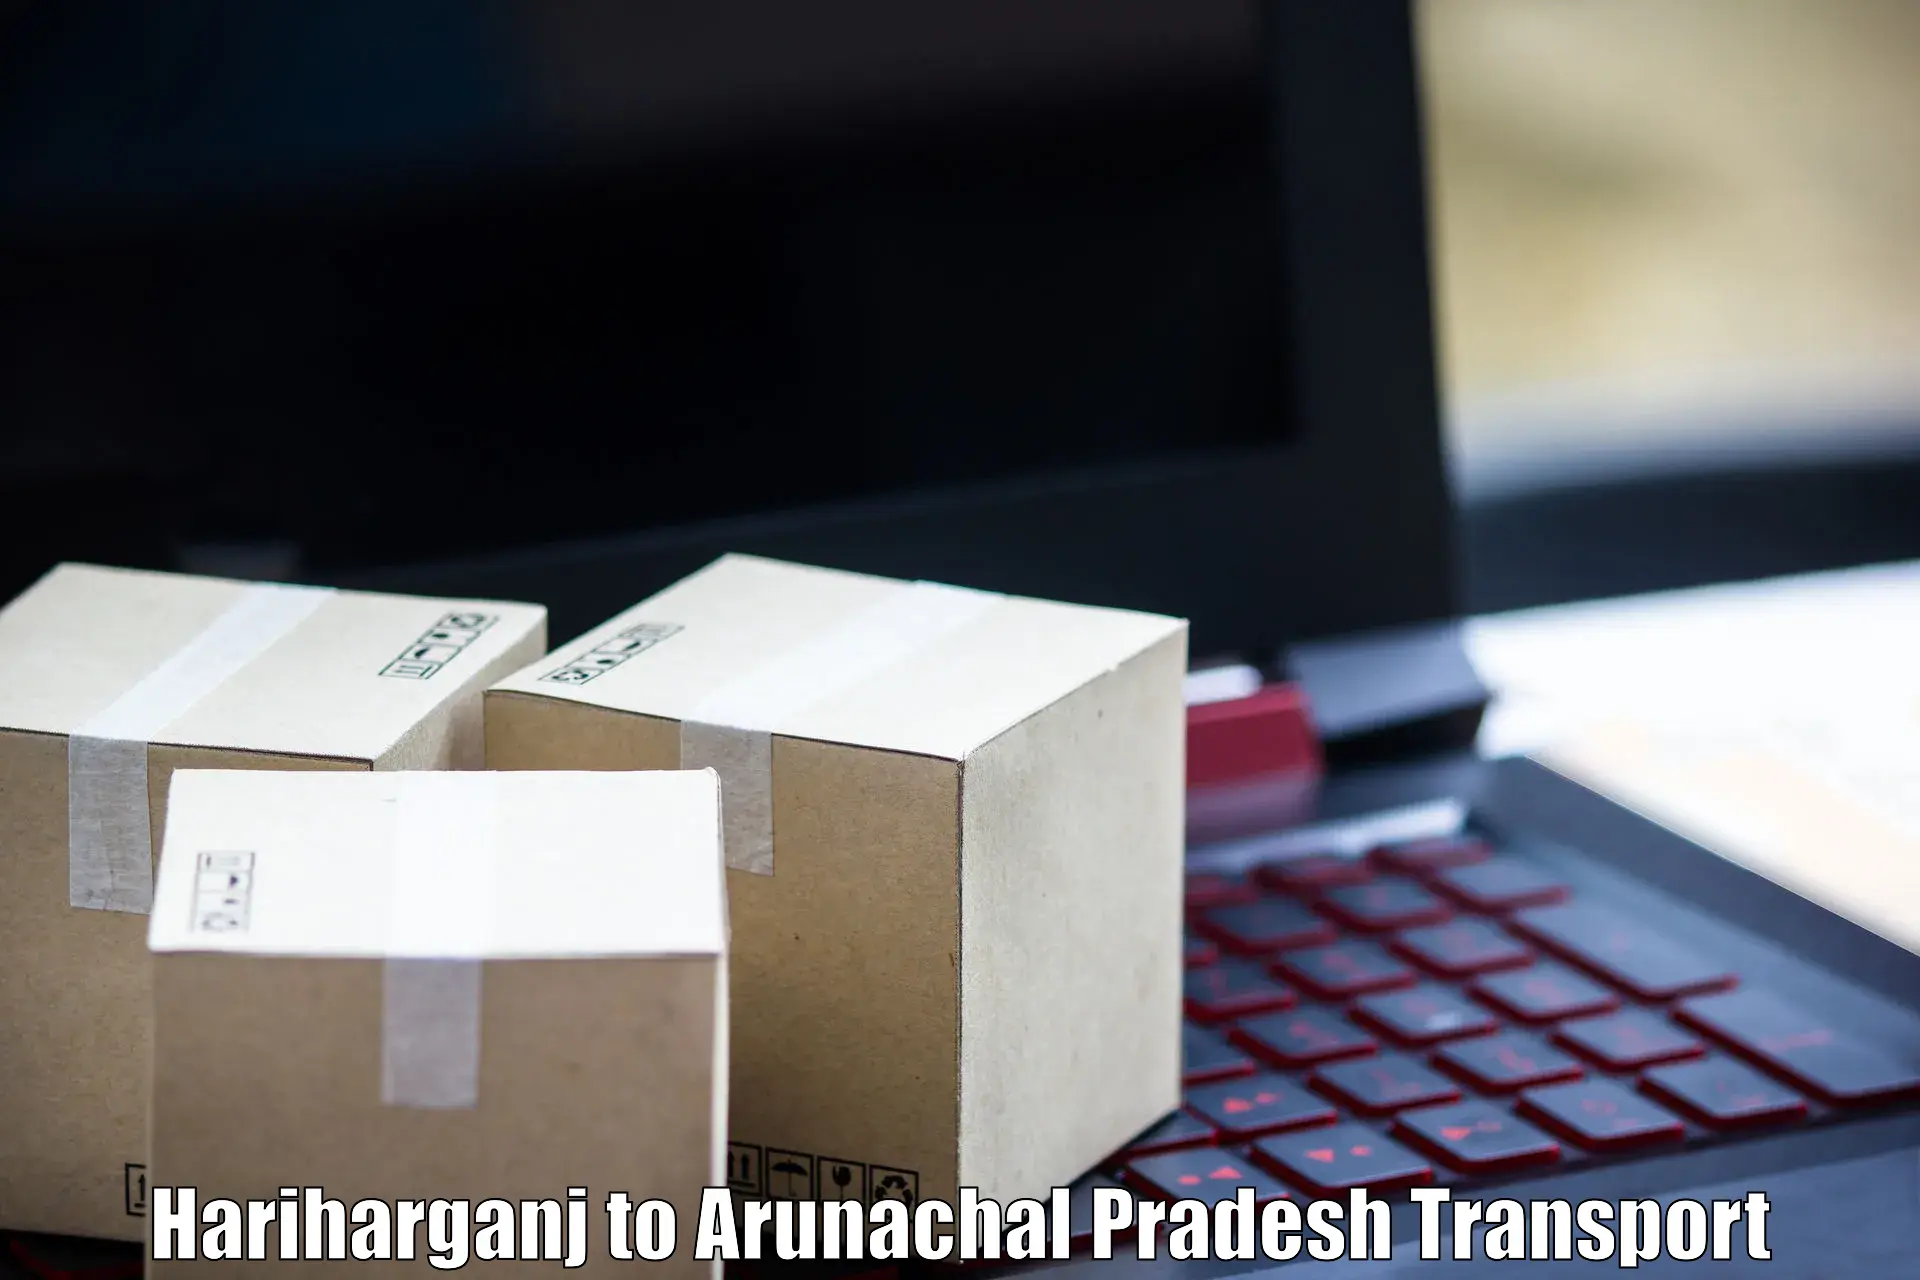 Air freight transport services Hariharganj to Deomali